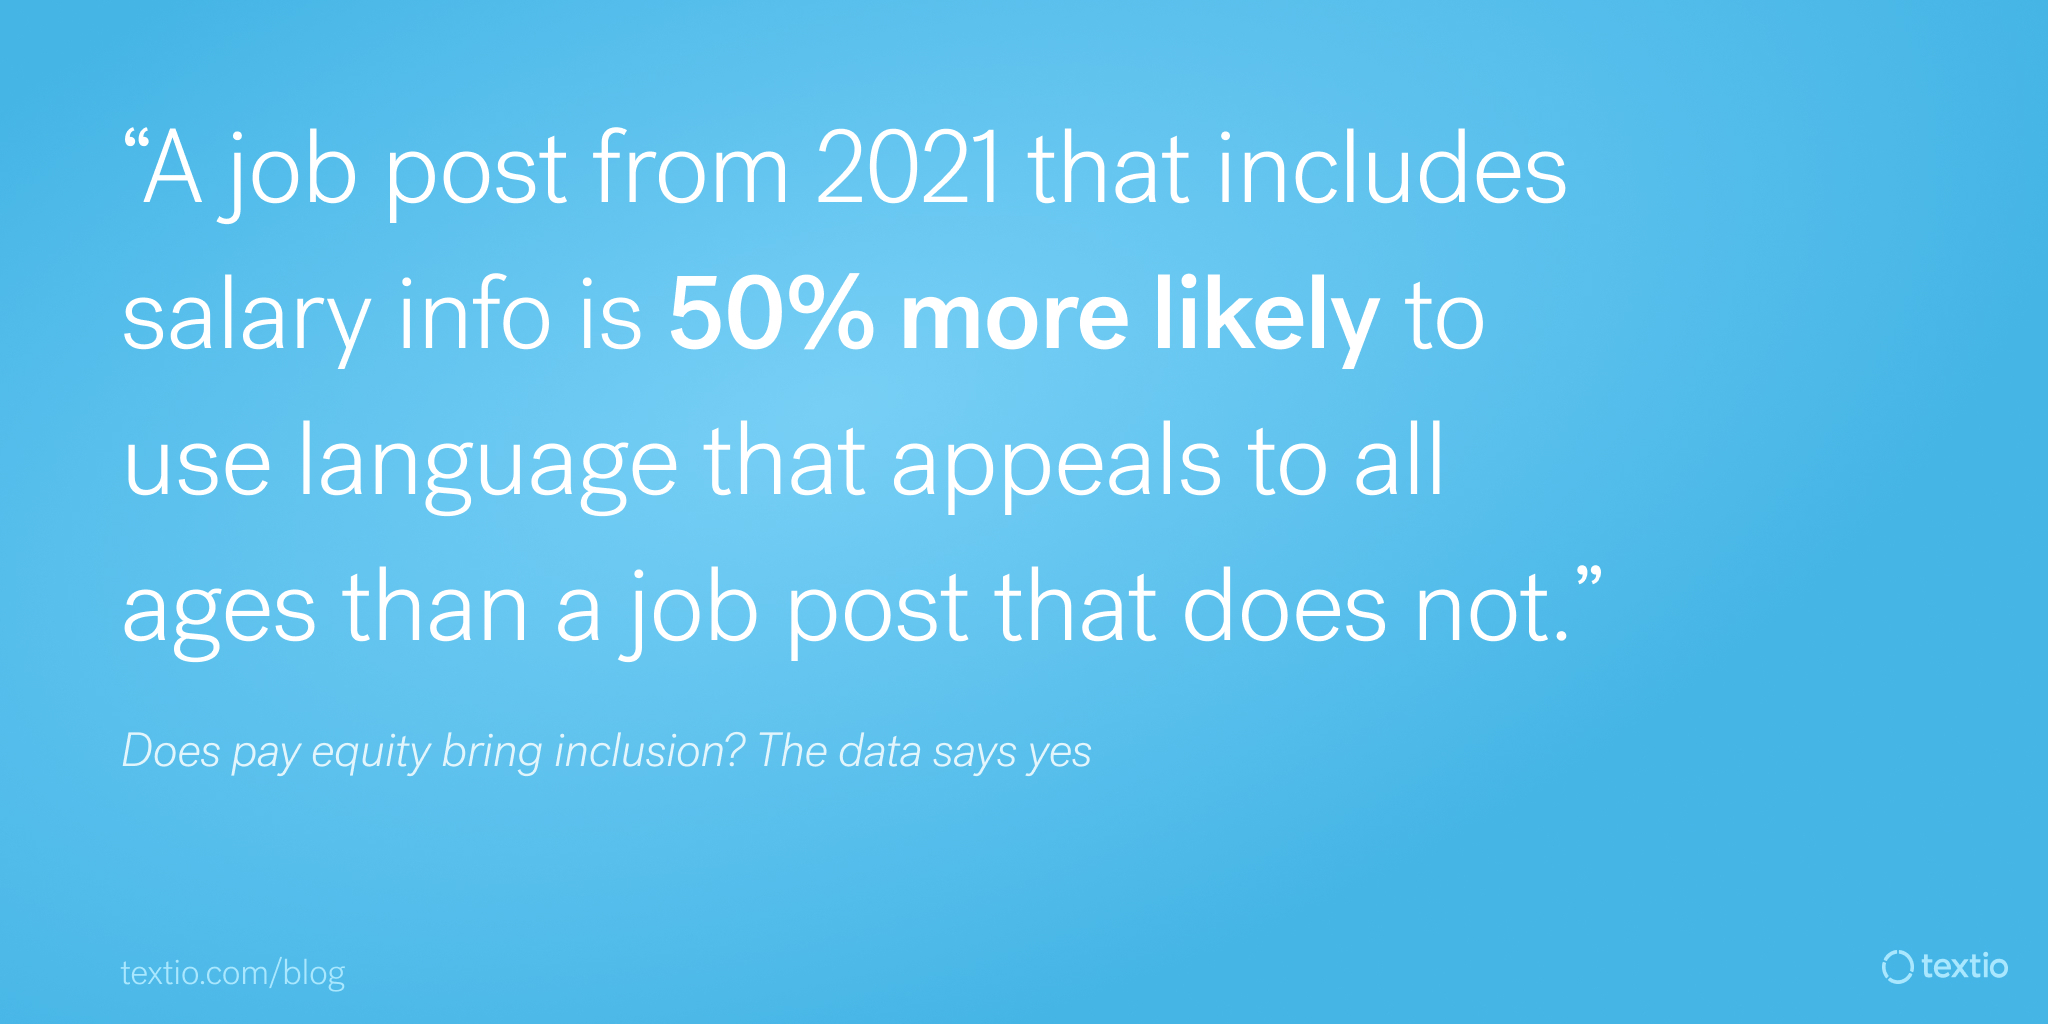 Graphic with quote ""A job post from 2021 that includes salary info is 50% more likely to use language that appeals to all ages than a job post that does not." Does pay equity bring inclusion? The data says yes"